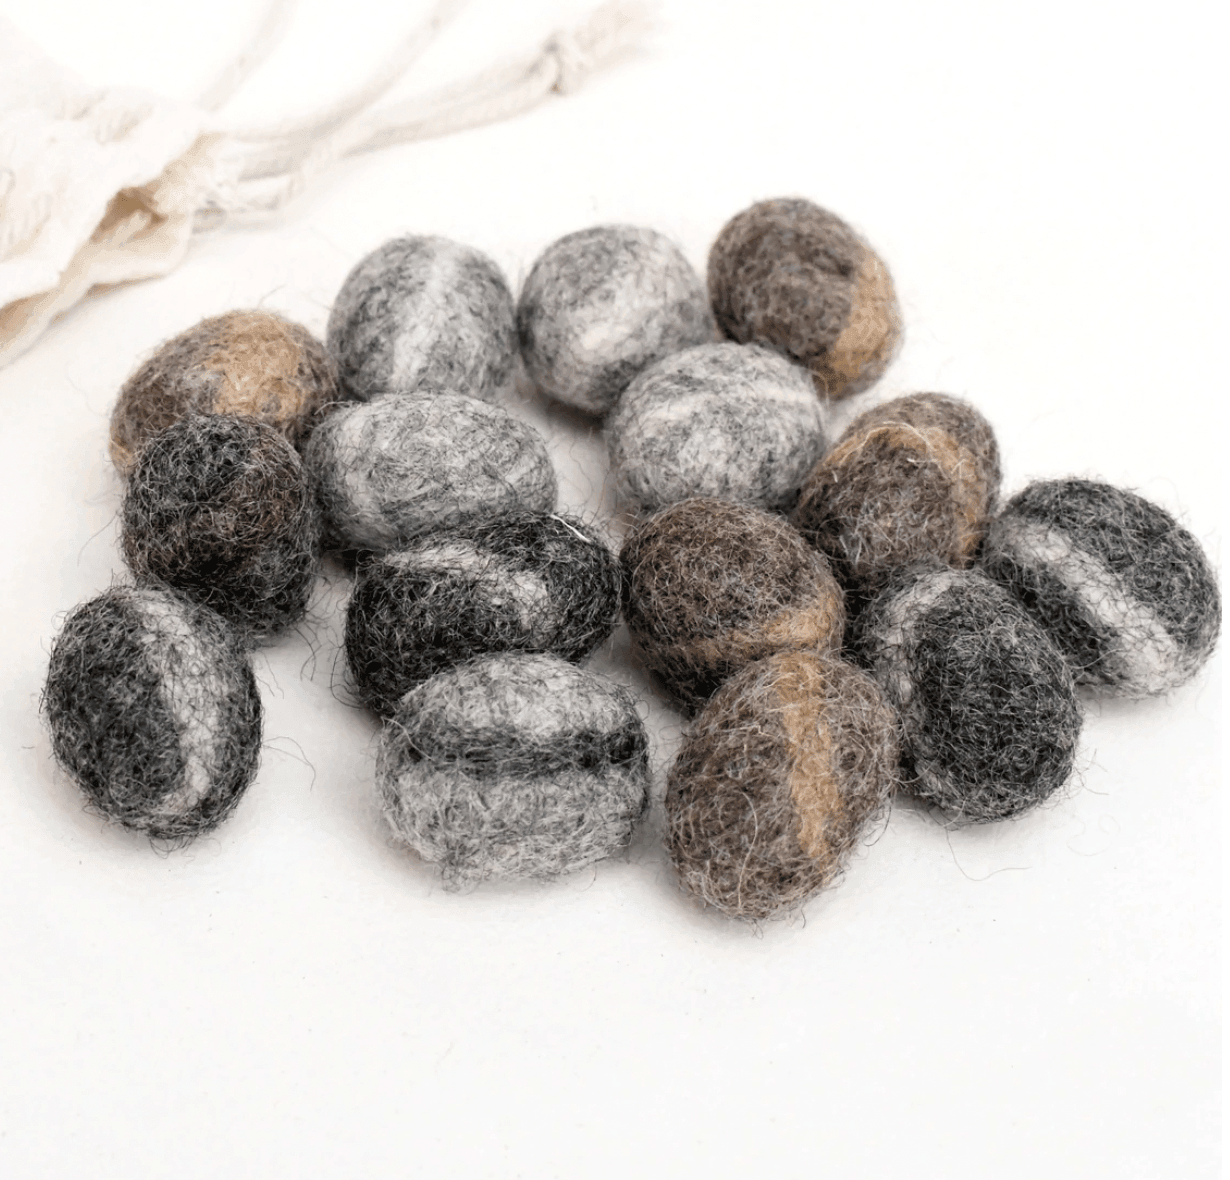 The Curated Parcel - Felt Pebble Stones 